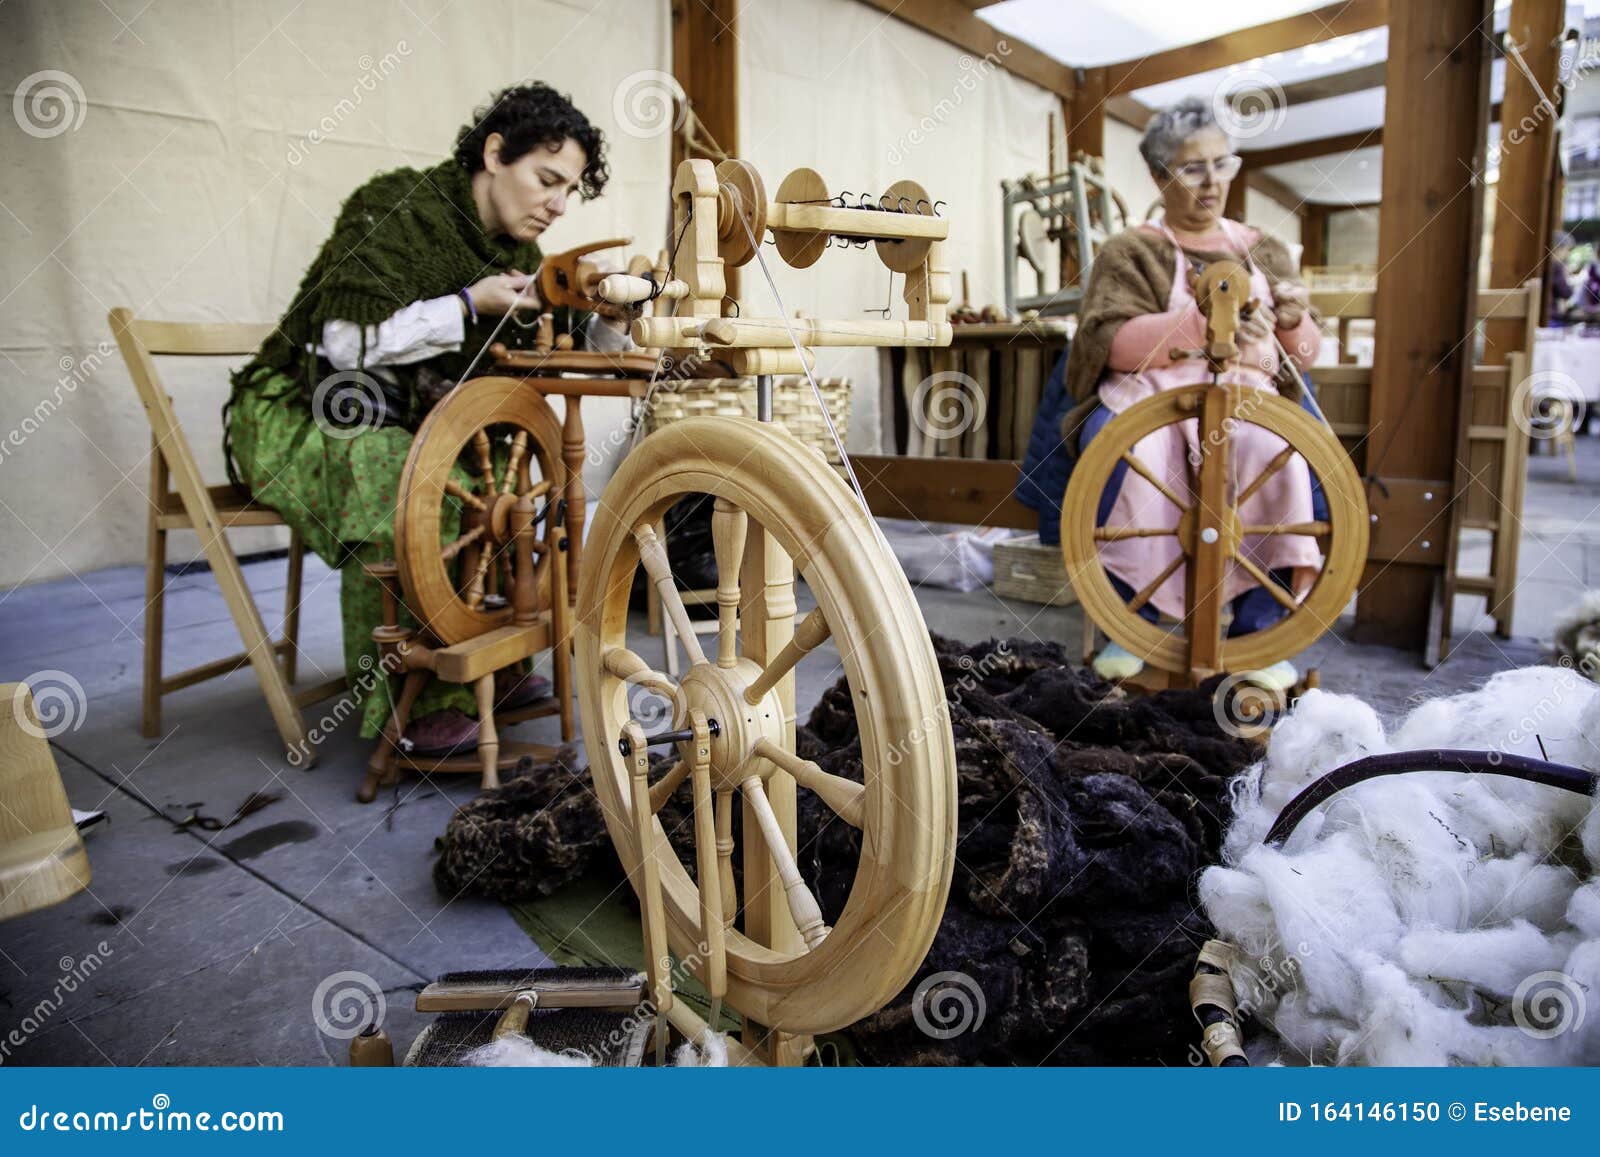 Women Spinning Thread with a Wooden Spinning Wheel Stock Photo - Image of  machine, textile: 164146150